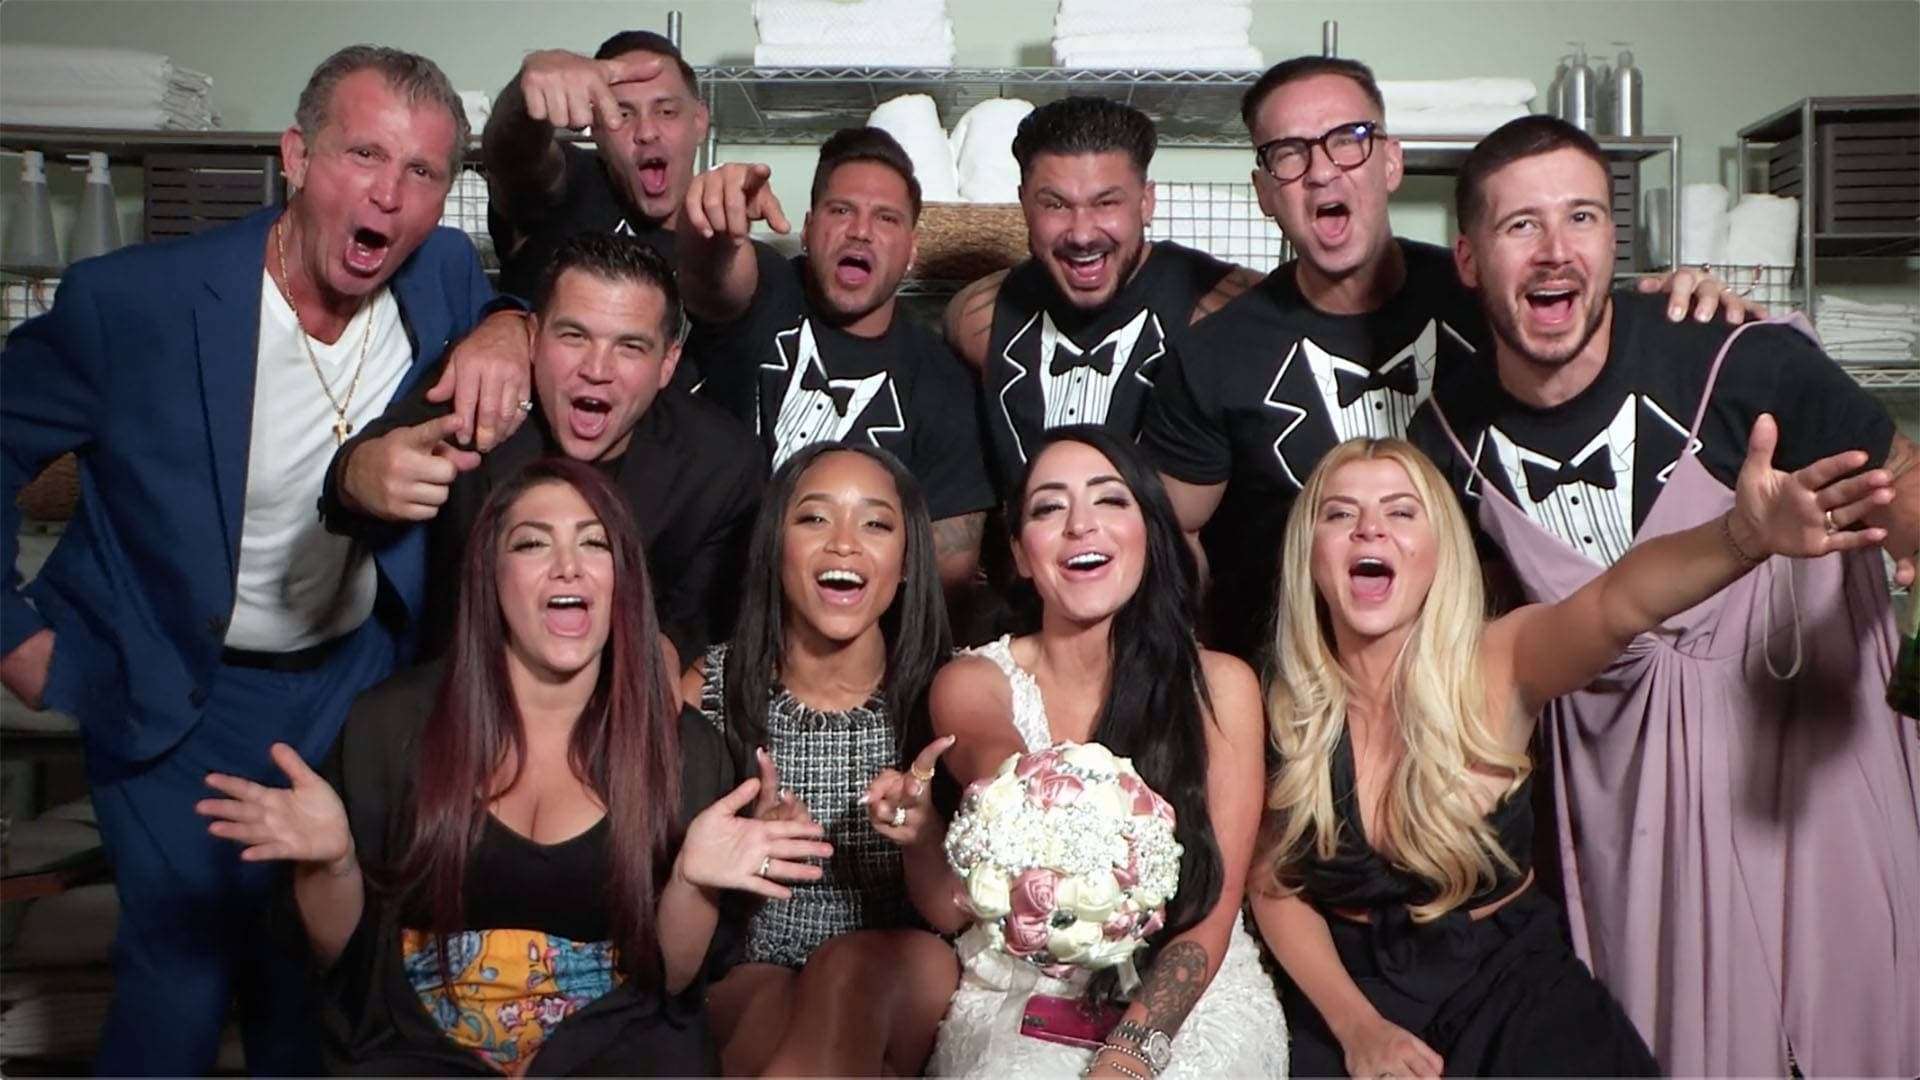 Watch Jersey Shore: Family Vacation